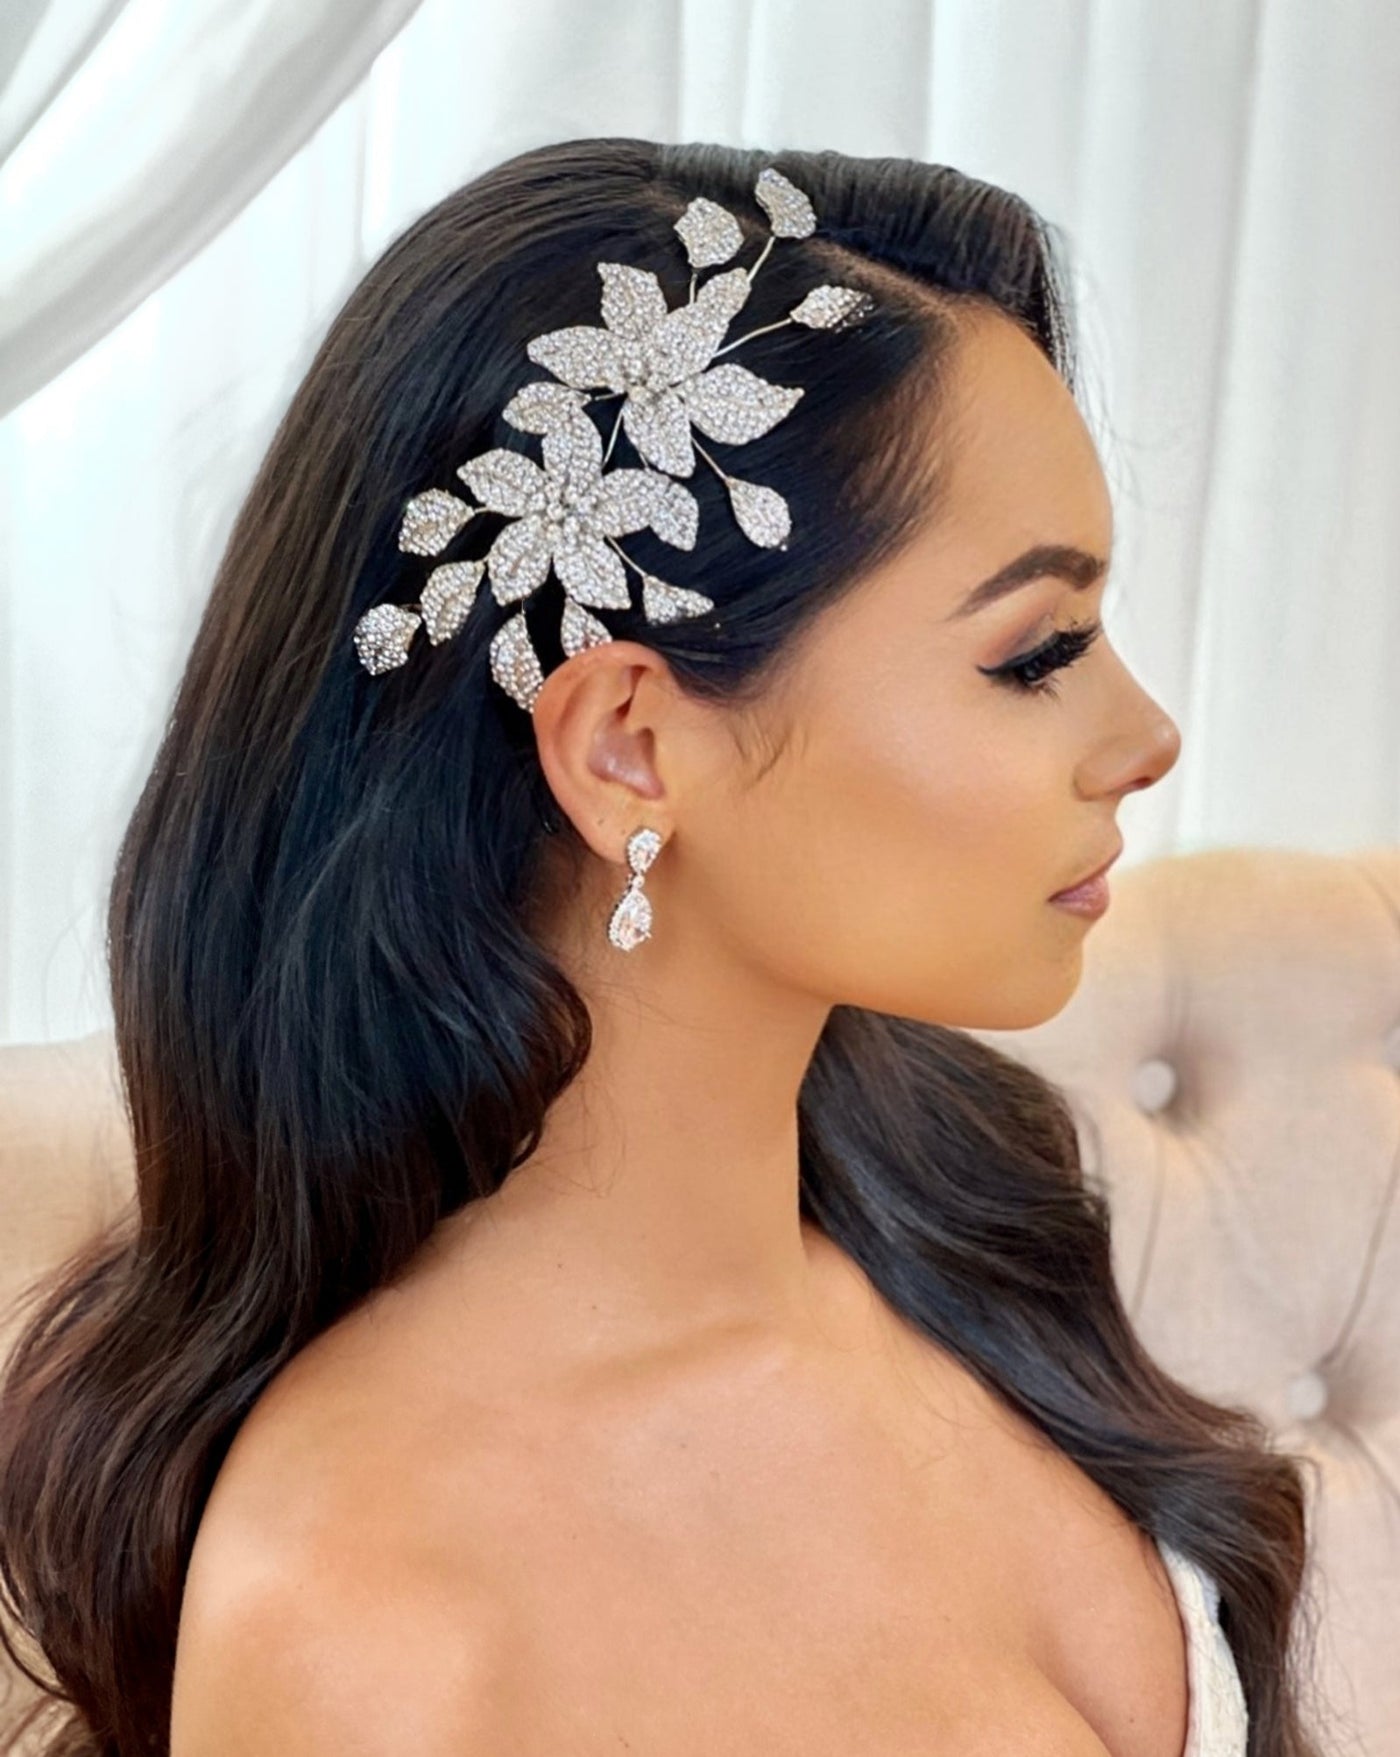 female model wearing bridal hair comb with silver crystalized flowers and sprigs of leaves